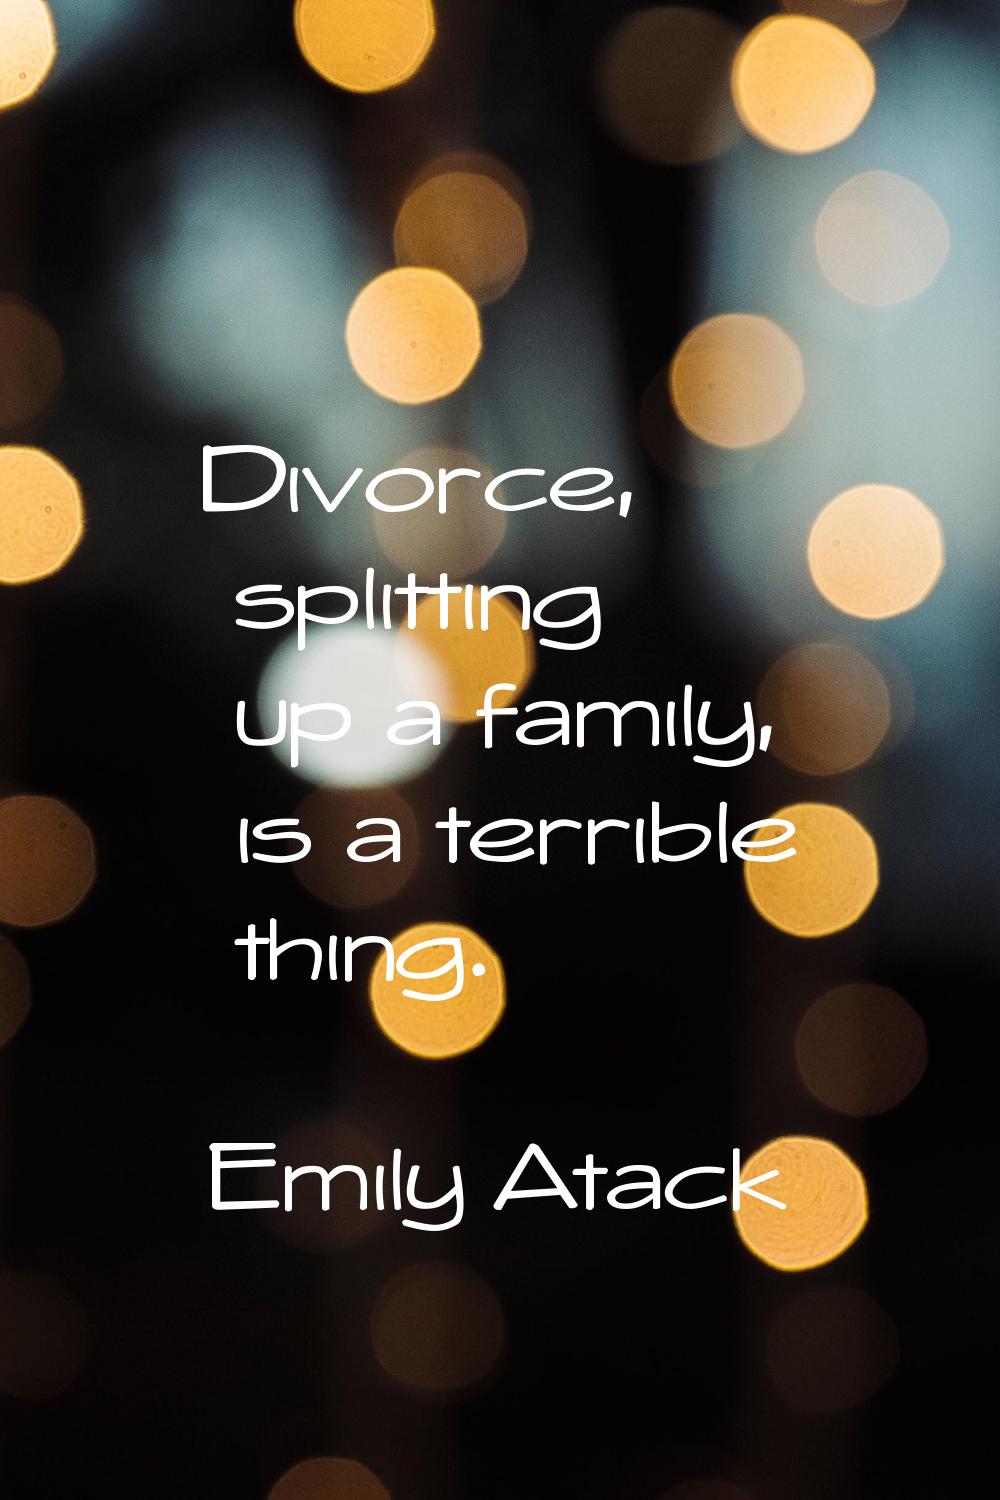 Divorce, splitting up a family, is a terrible thing.